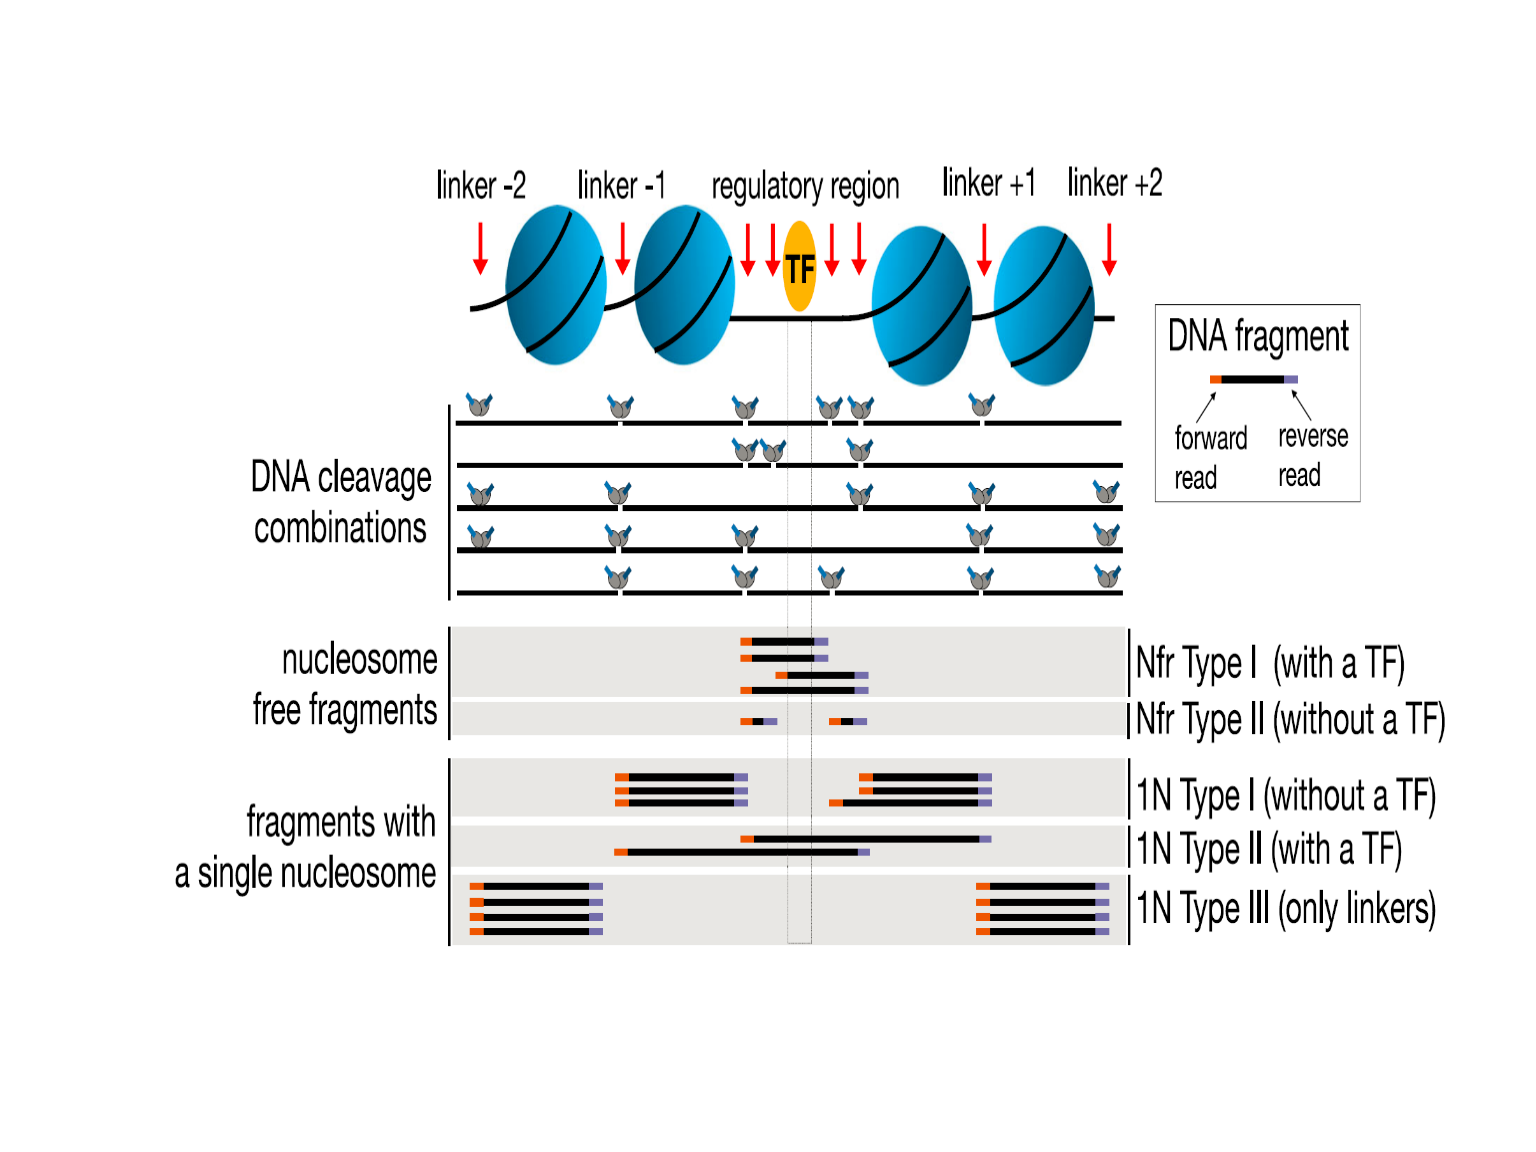 Figure 6. Fragments generated by Tn5 tagementation in ATAC-seq.